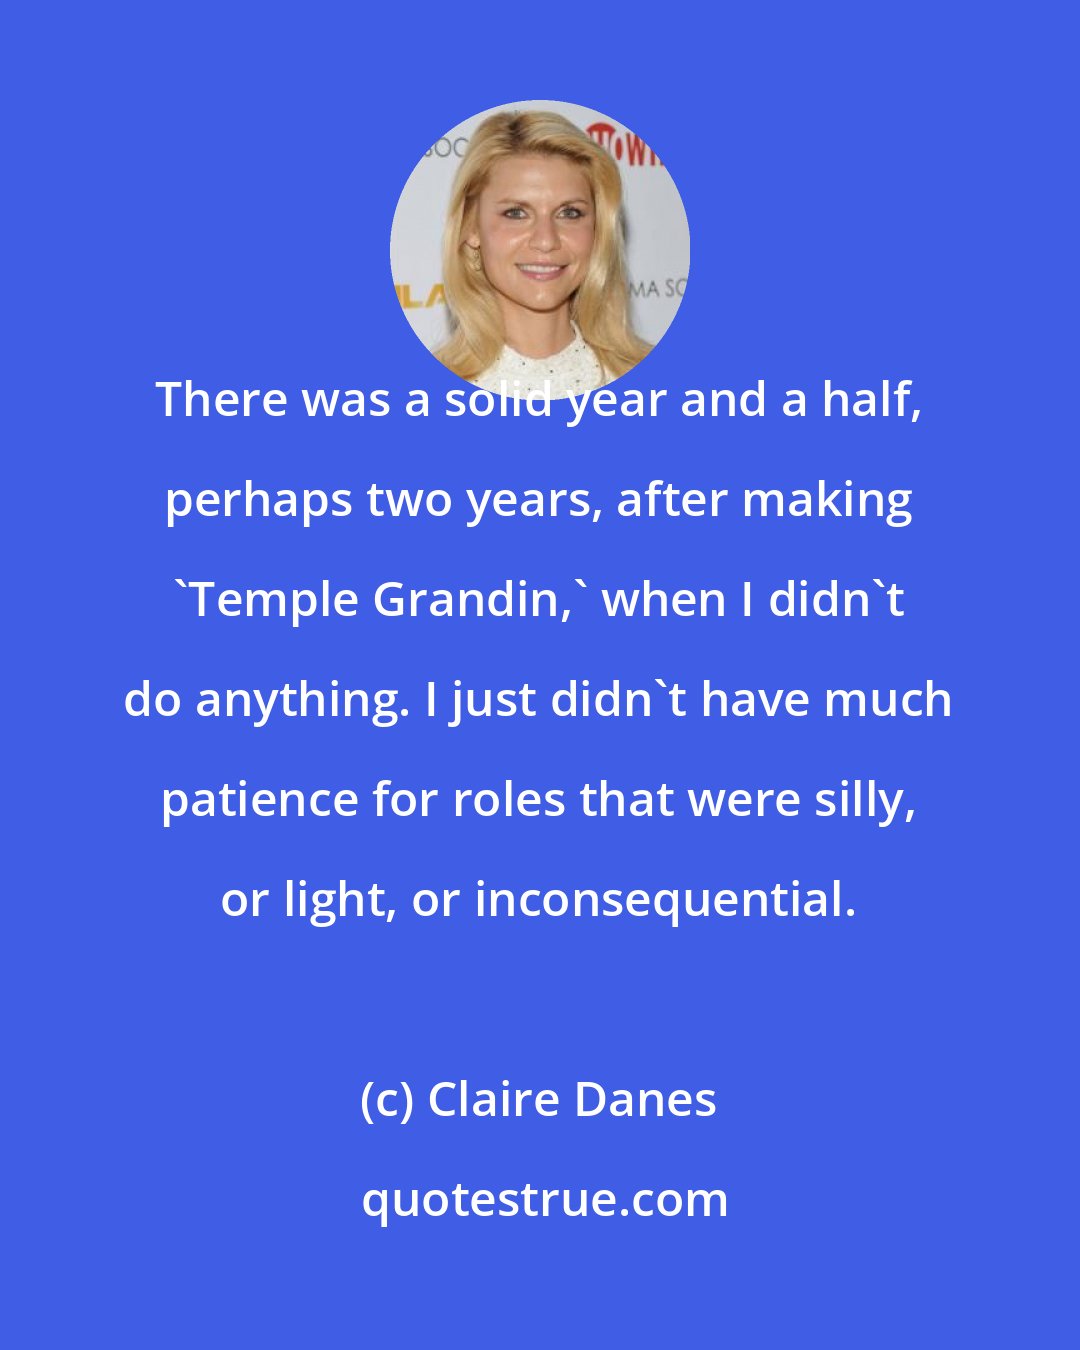 Claire Danes: There was a solid year and a half, perhaps two years, after making 'Temple Grandin,' when I didn't do anything. I just didn't have much patience for roles that were silly, or light, or inconsequential.